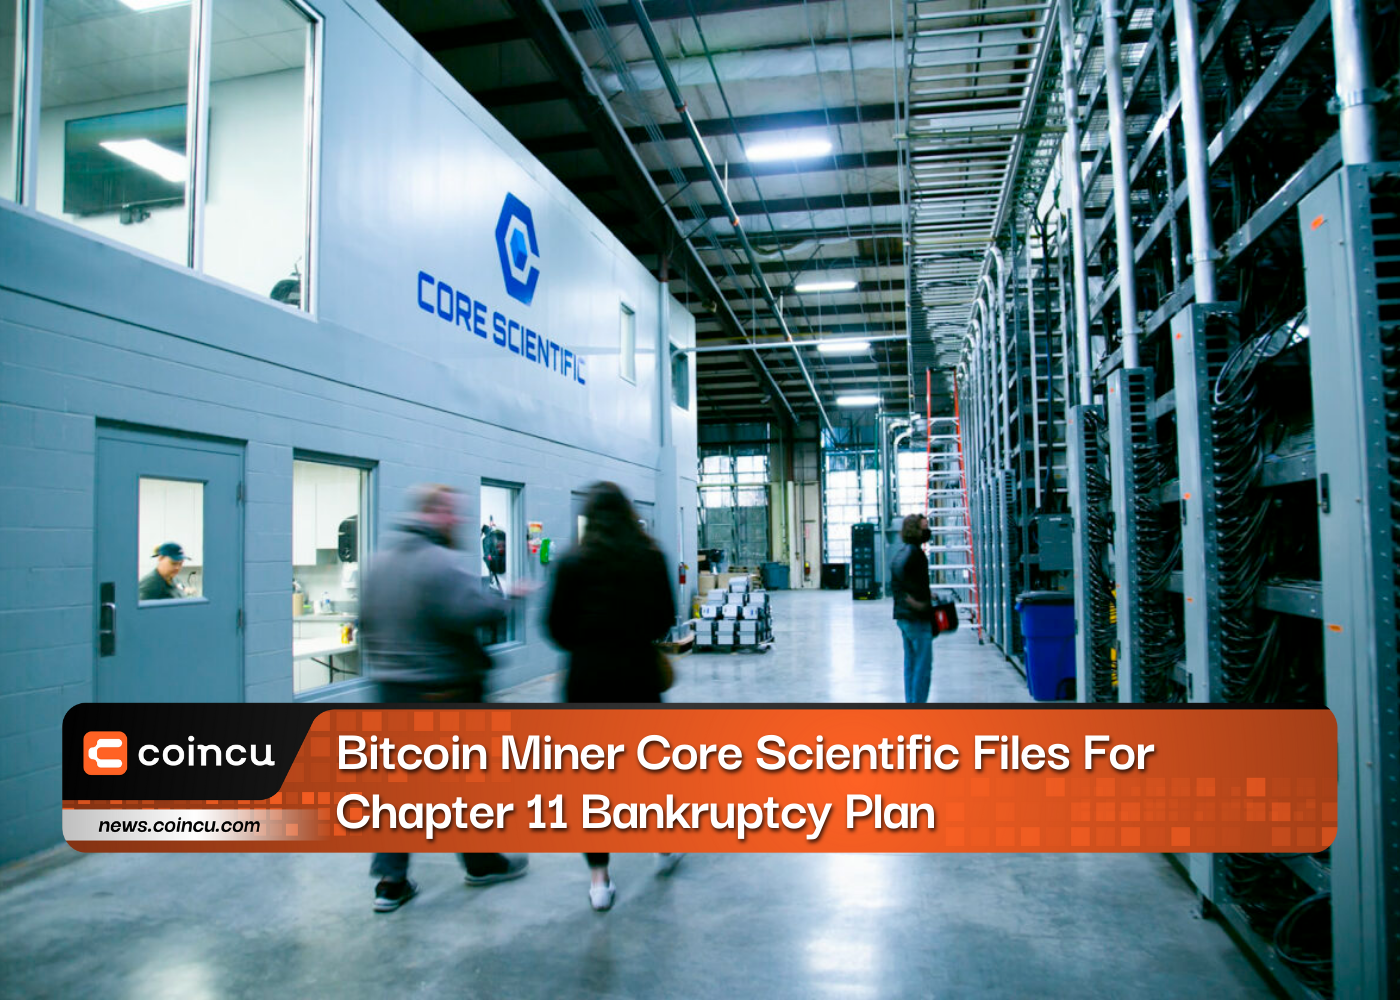 Bitcoin Miner Core Scientific Files For Chapter 11 Bankruptcy Plan